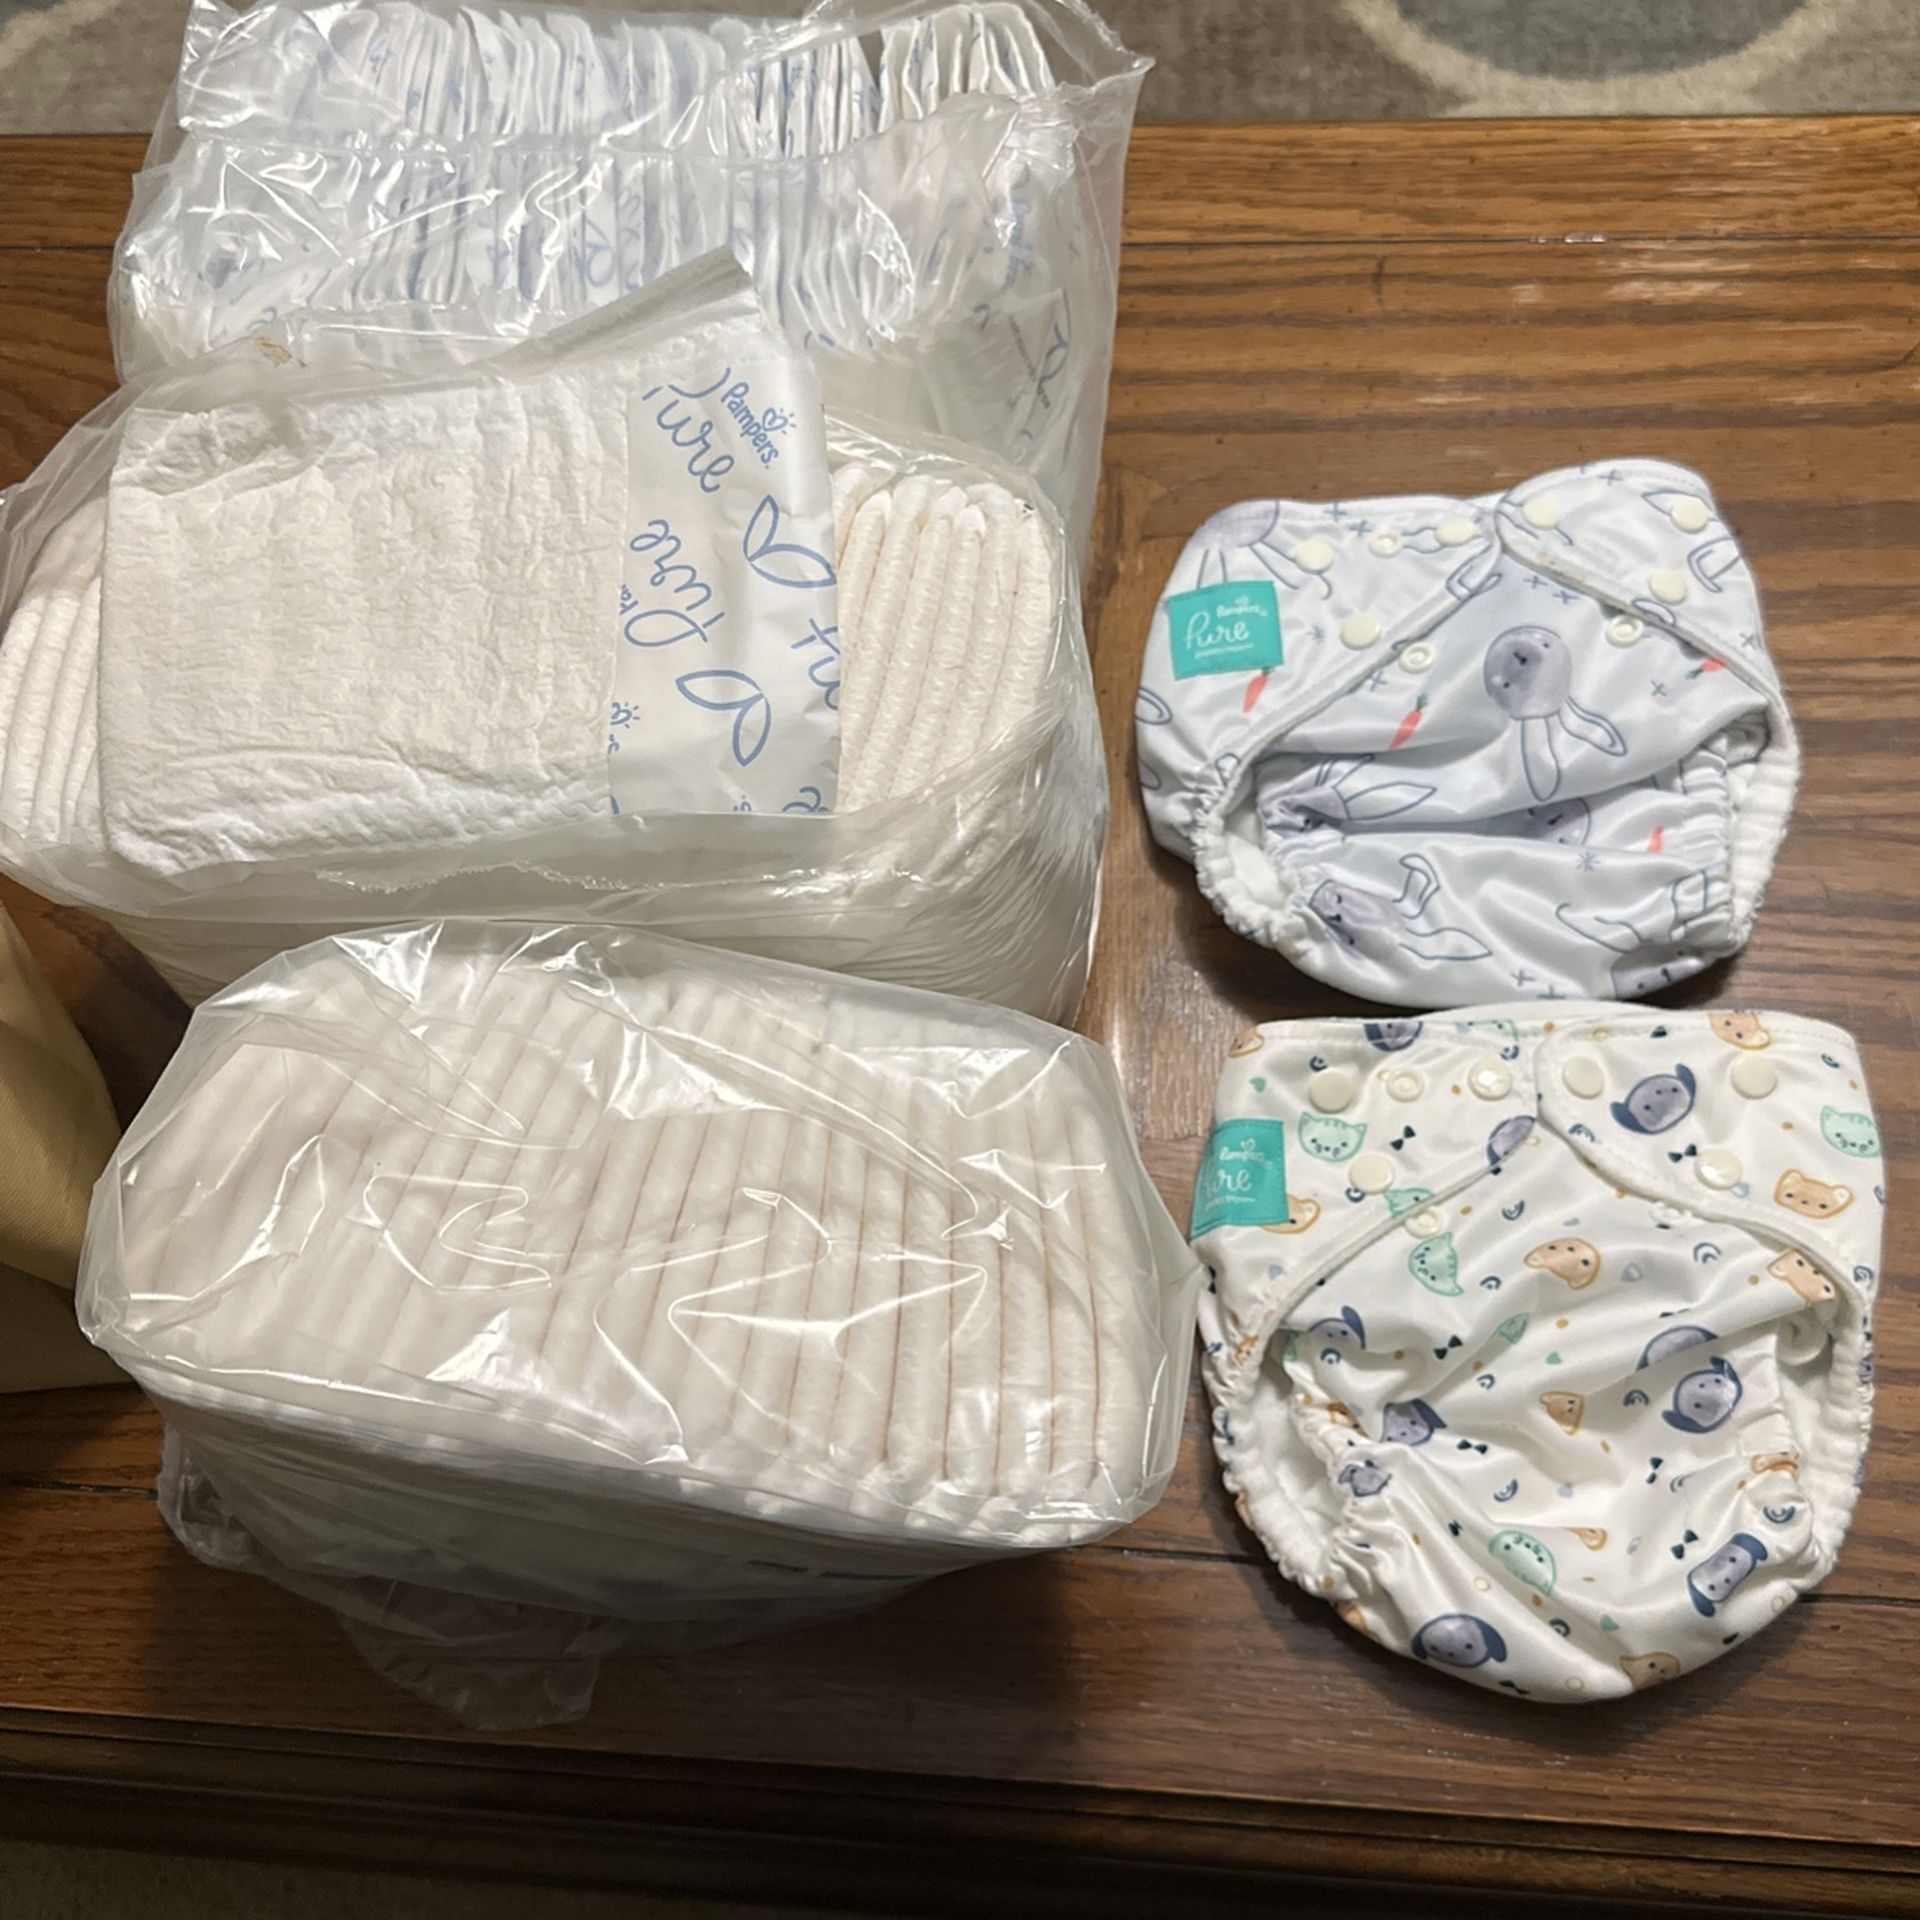 Reusable/Hybrid Diapers